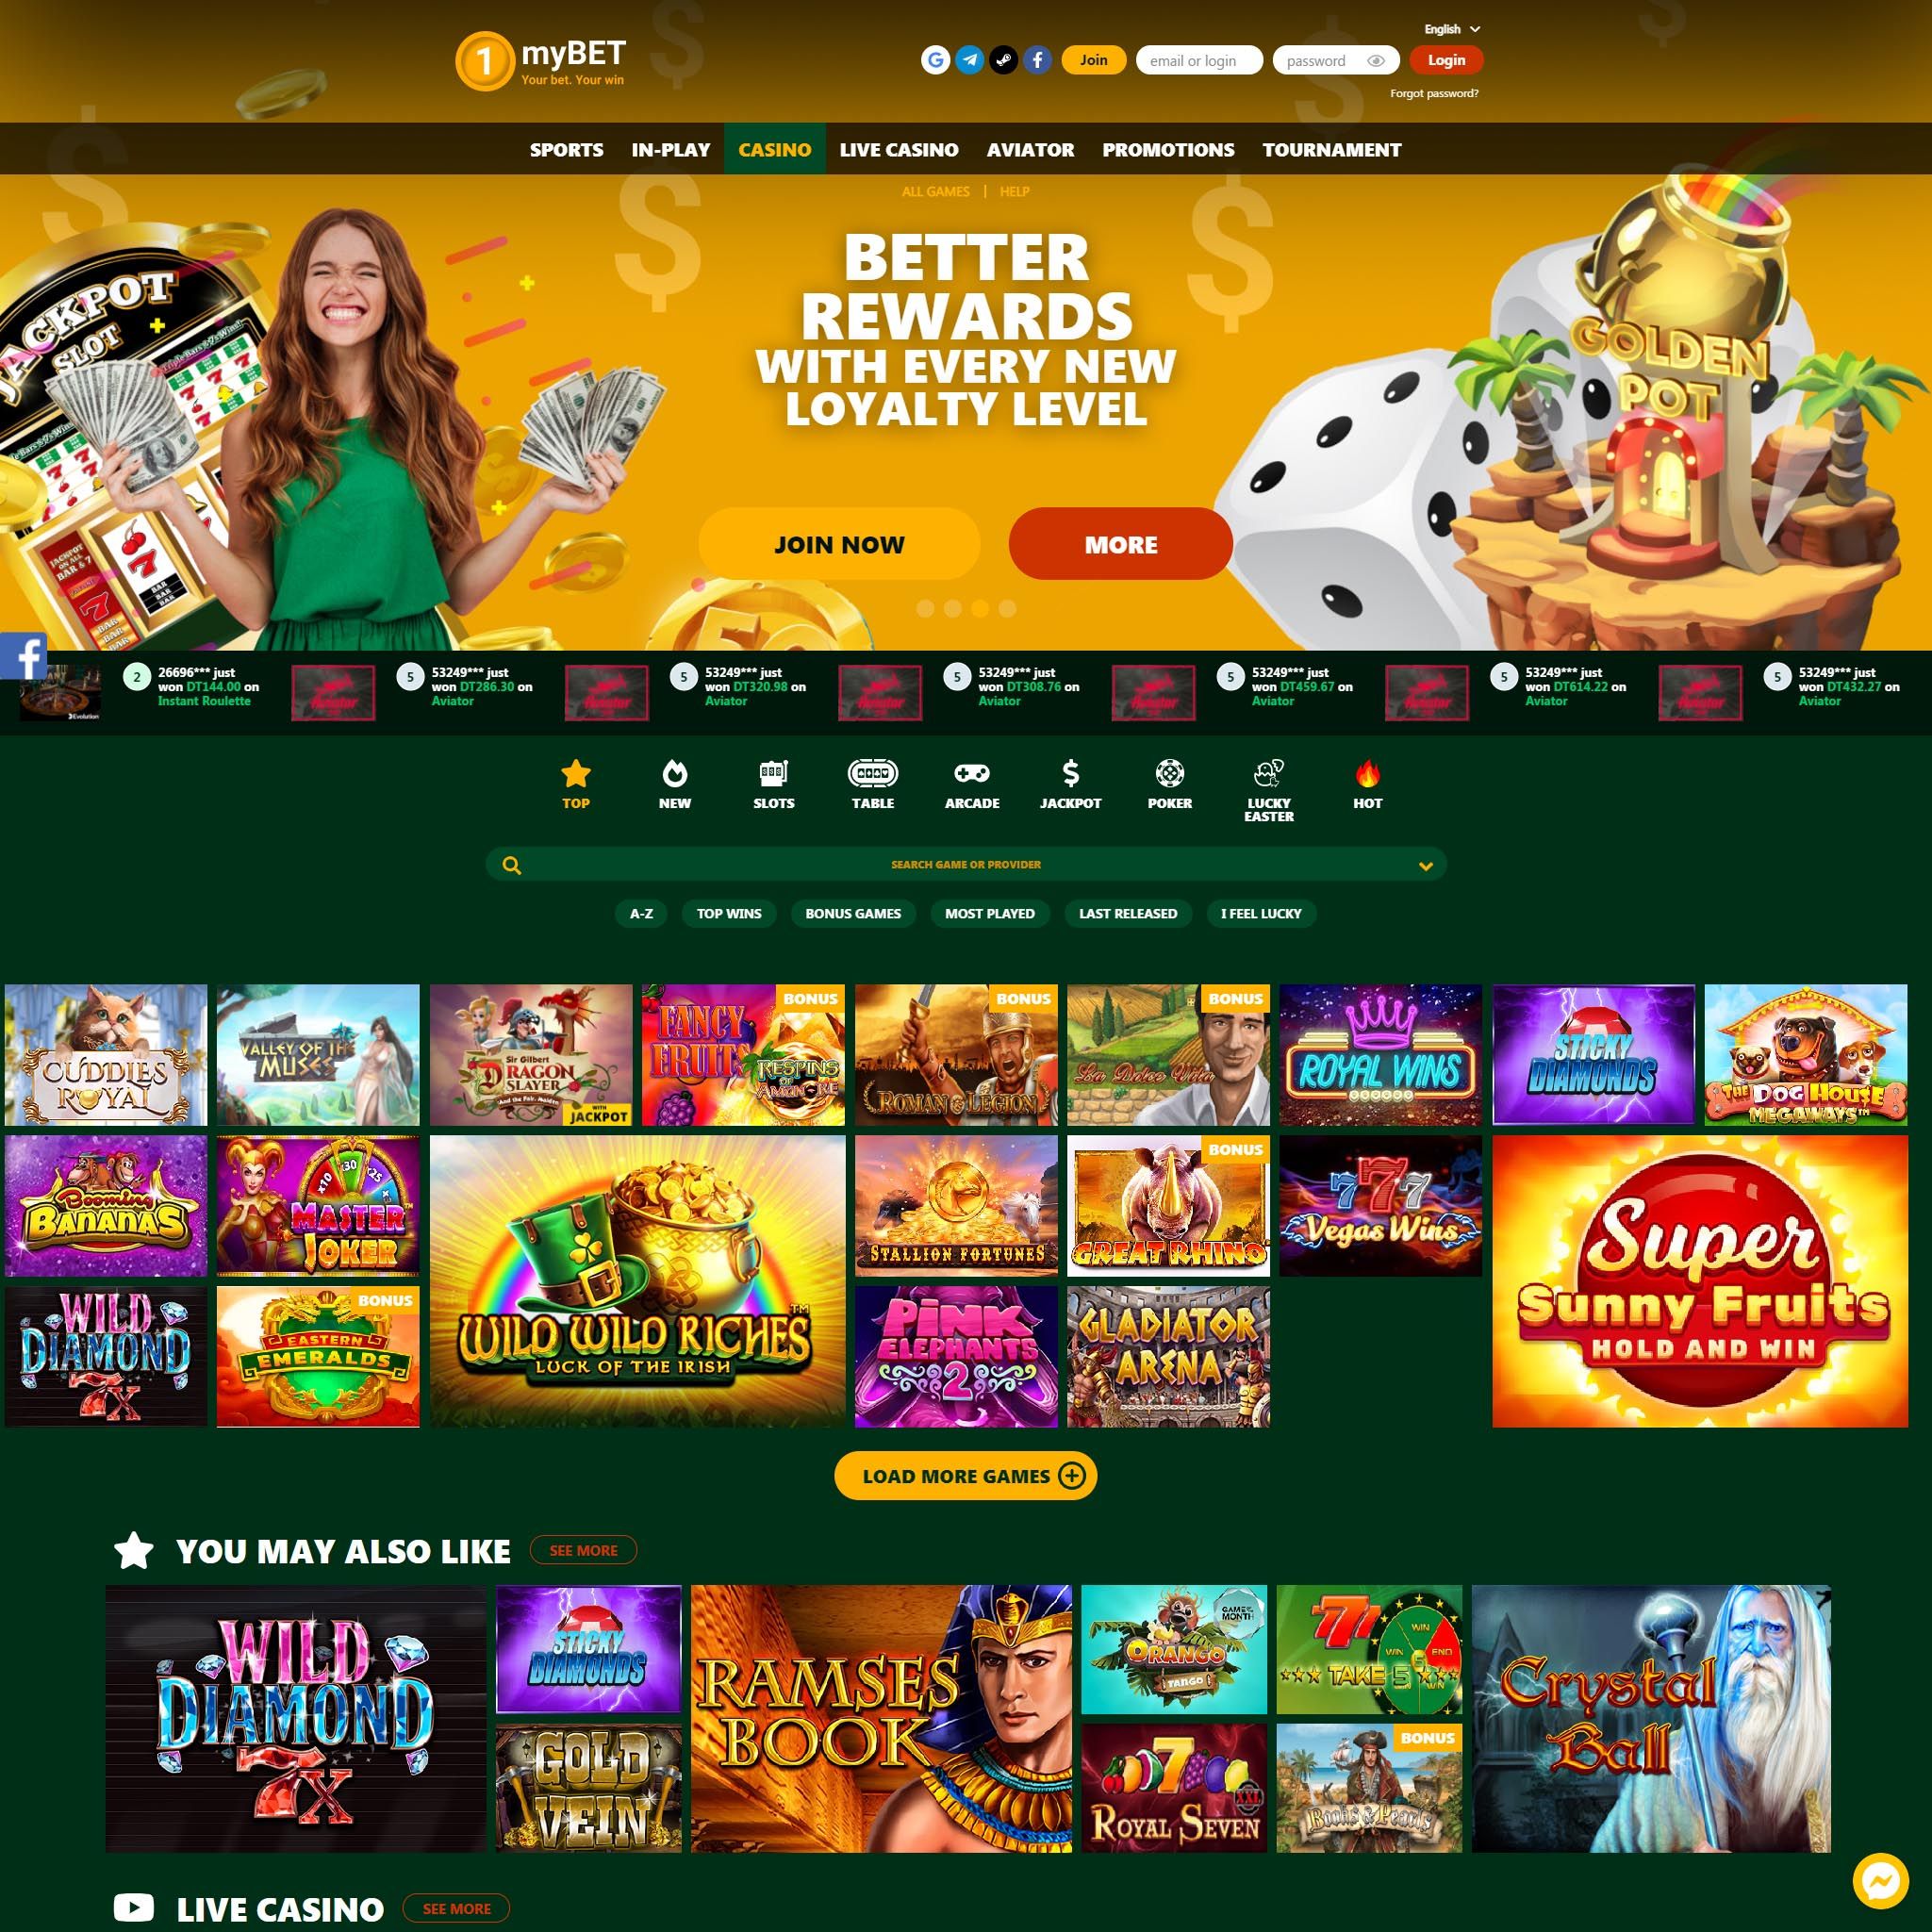 1mybet Casino review by Mr. Gamble